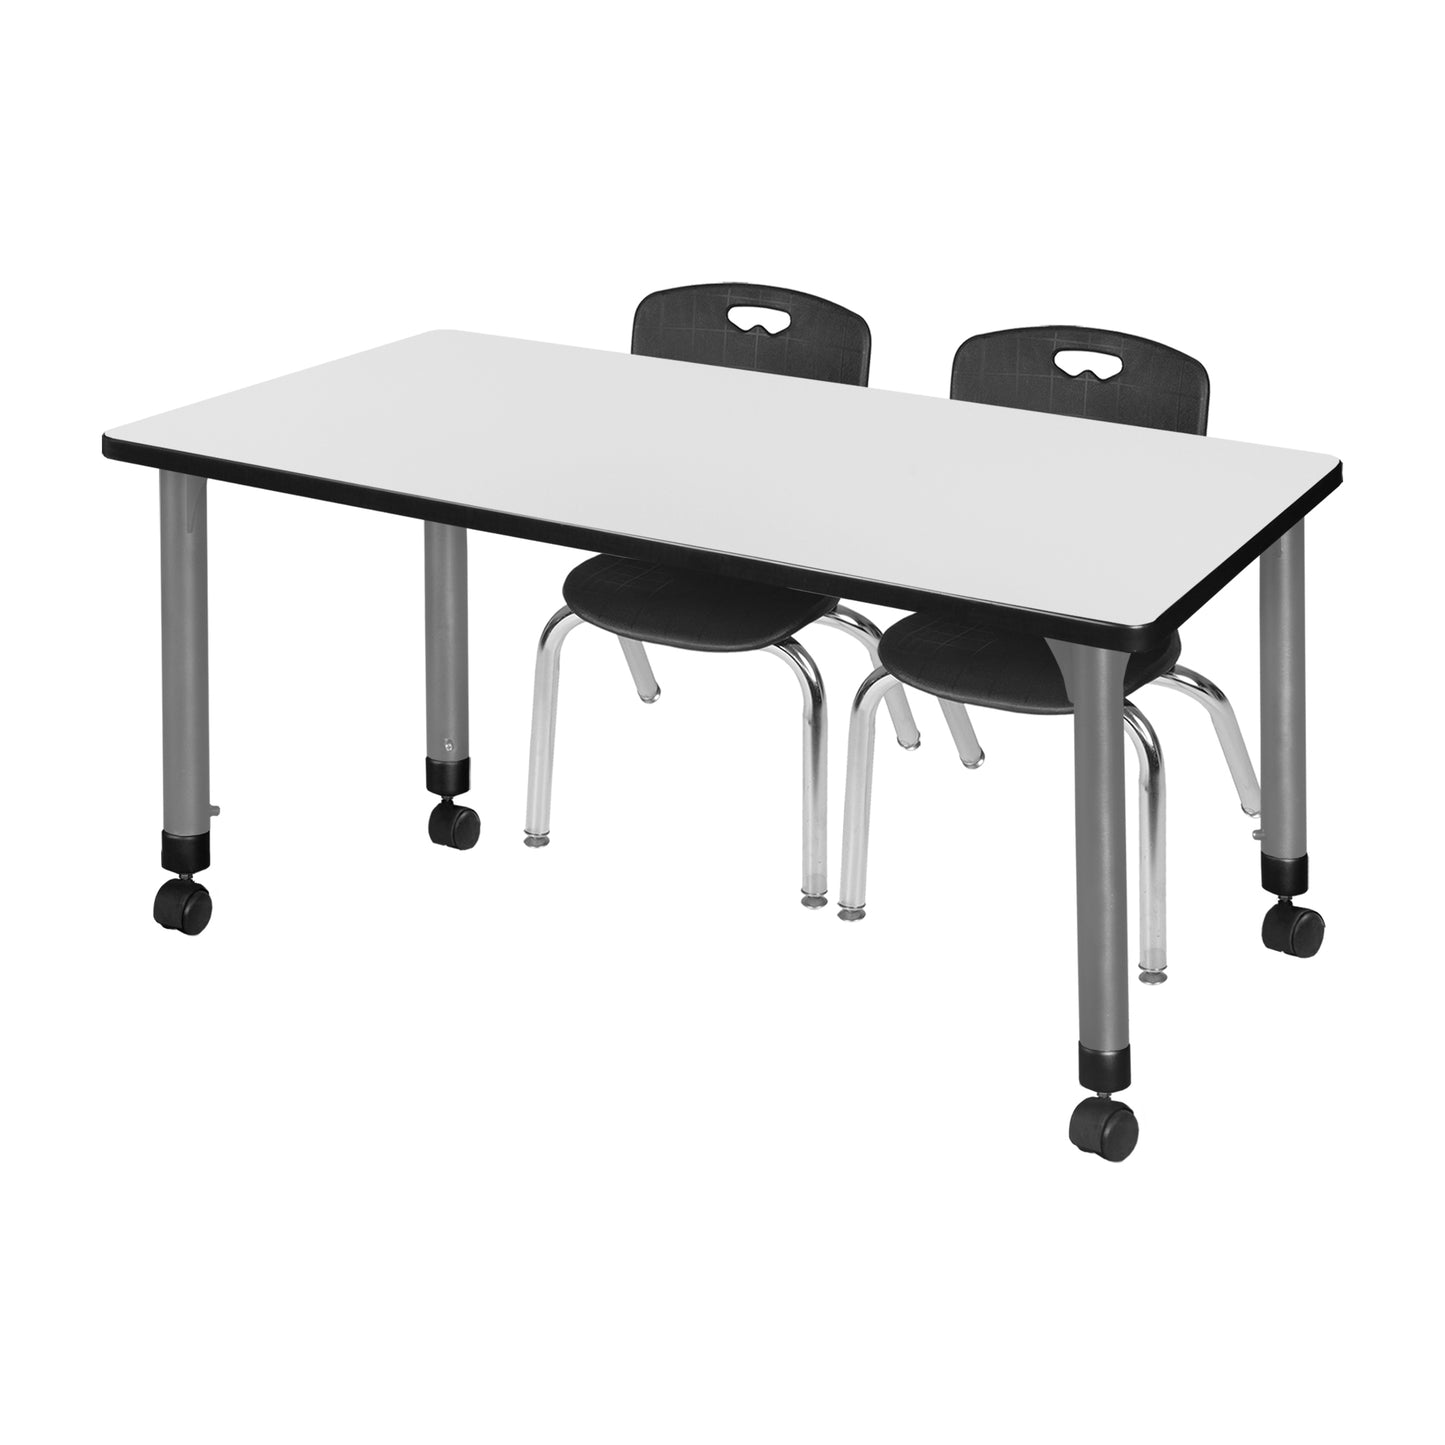 Regency Kee 72 x 30 in. Adjustable Classroom Table & 2 Andy 12 in. Stack Chairs